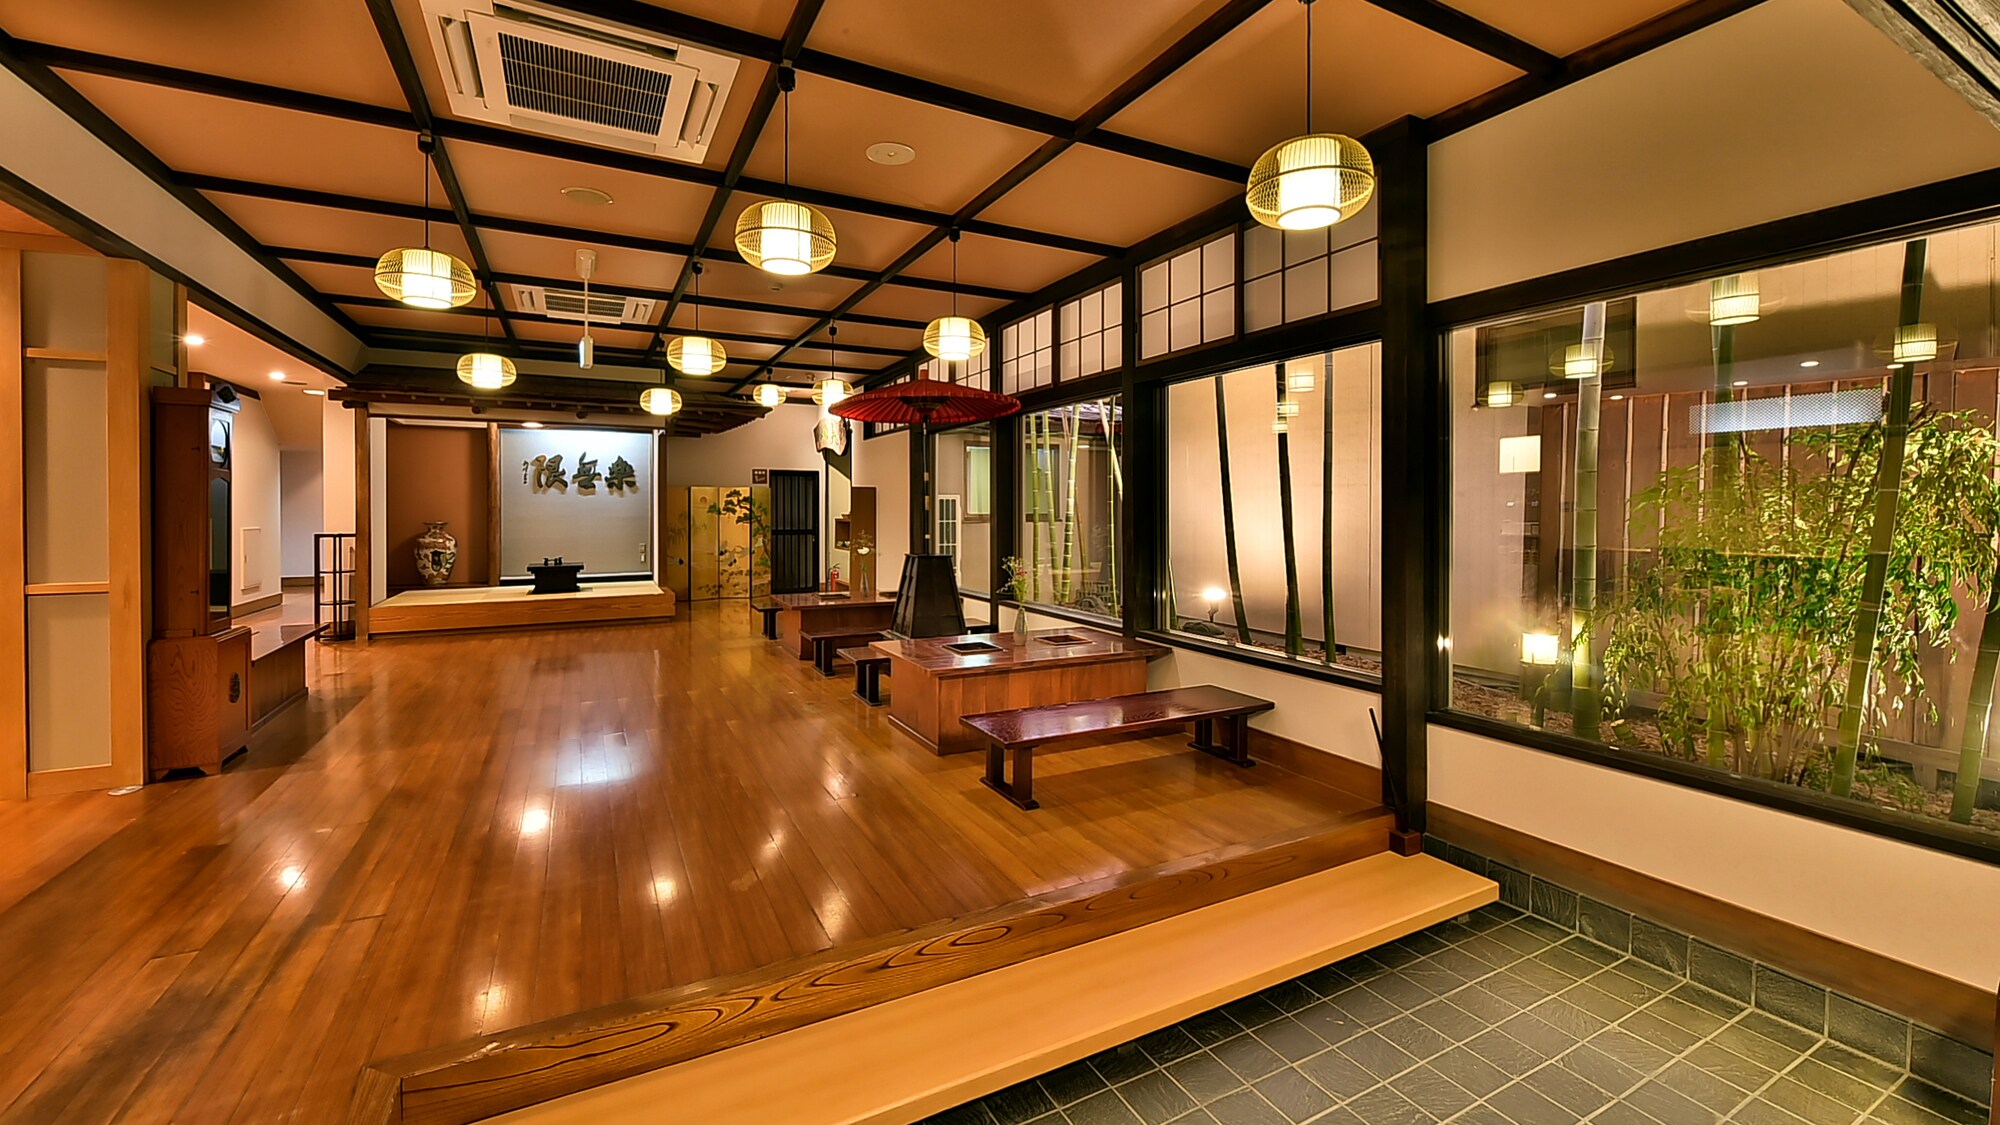 Lobby overlooking the bamboo grove